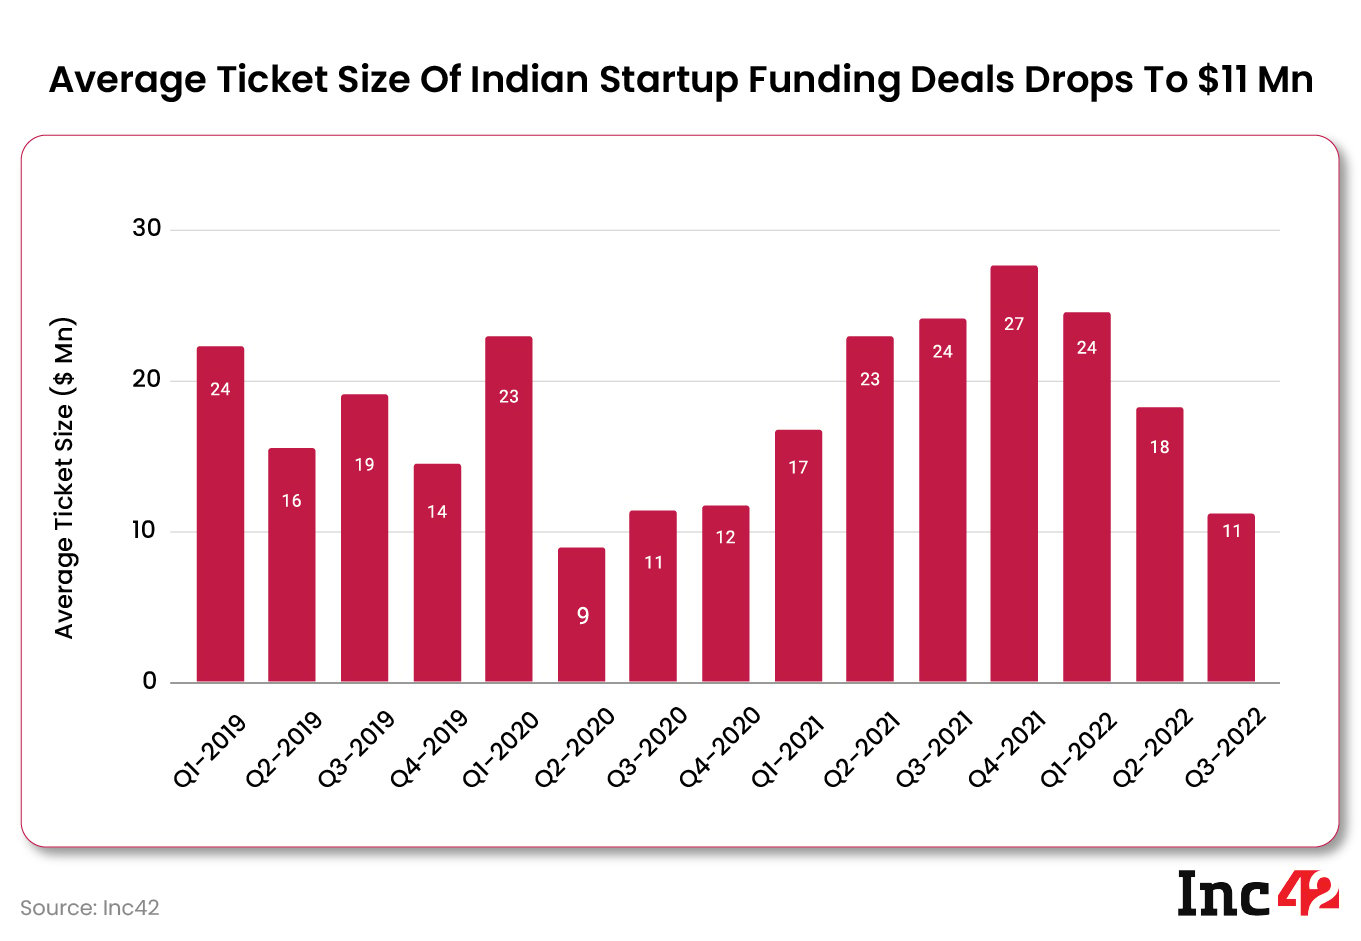 Average ticket size of Indian startup funding deals drops to $11 Mn